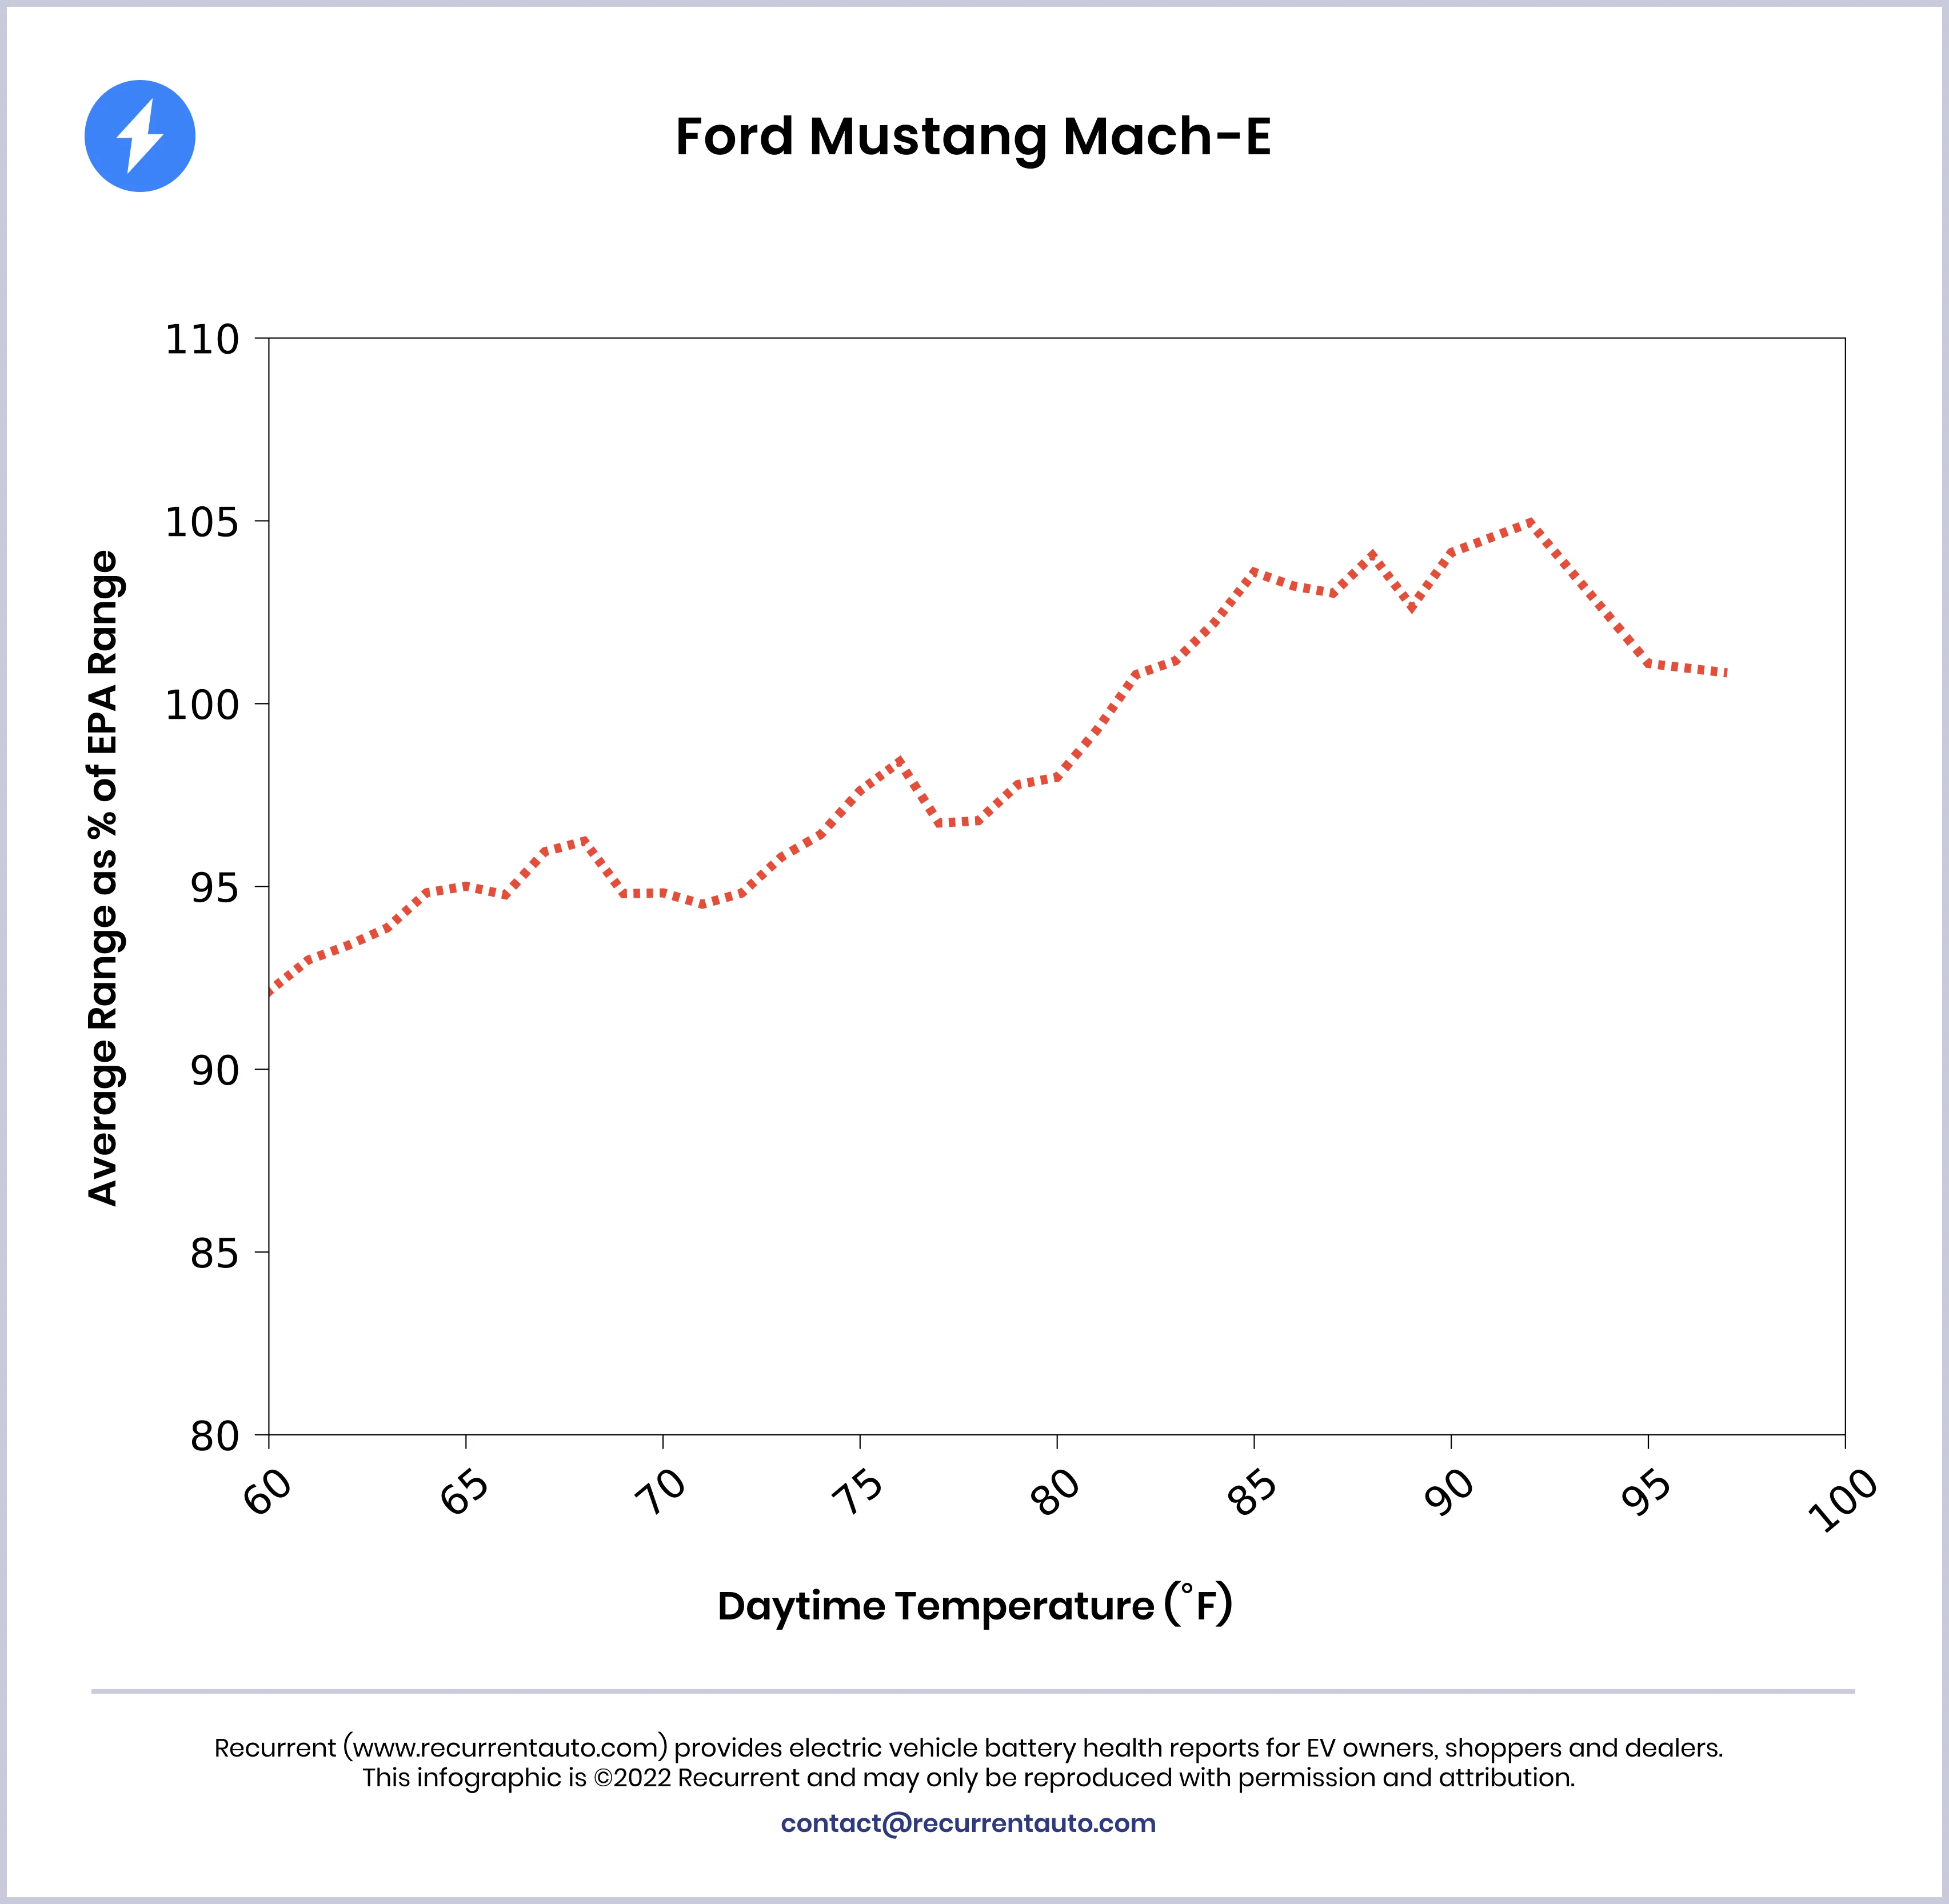 Range dependence on temperature for Mustang Mach-E